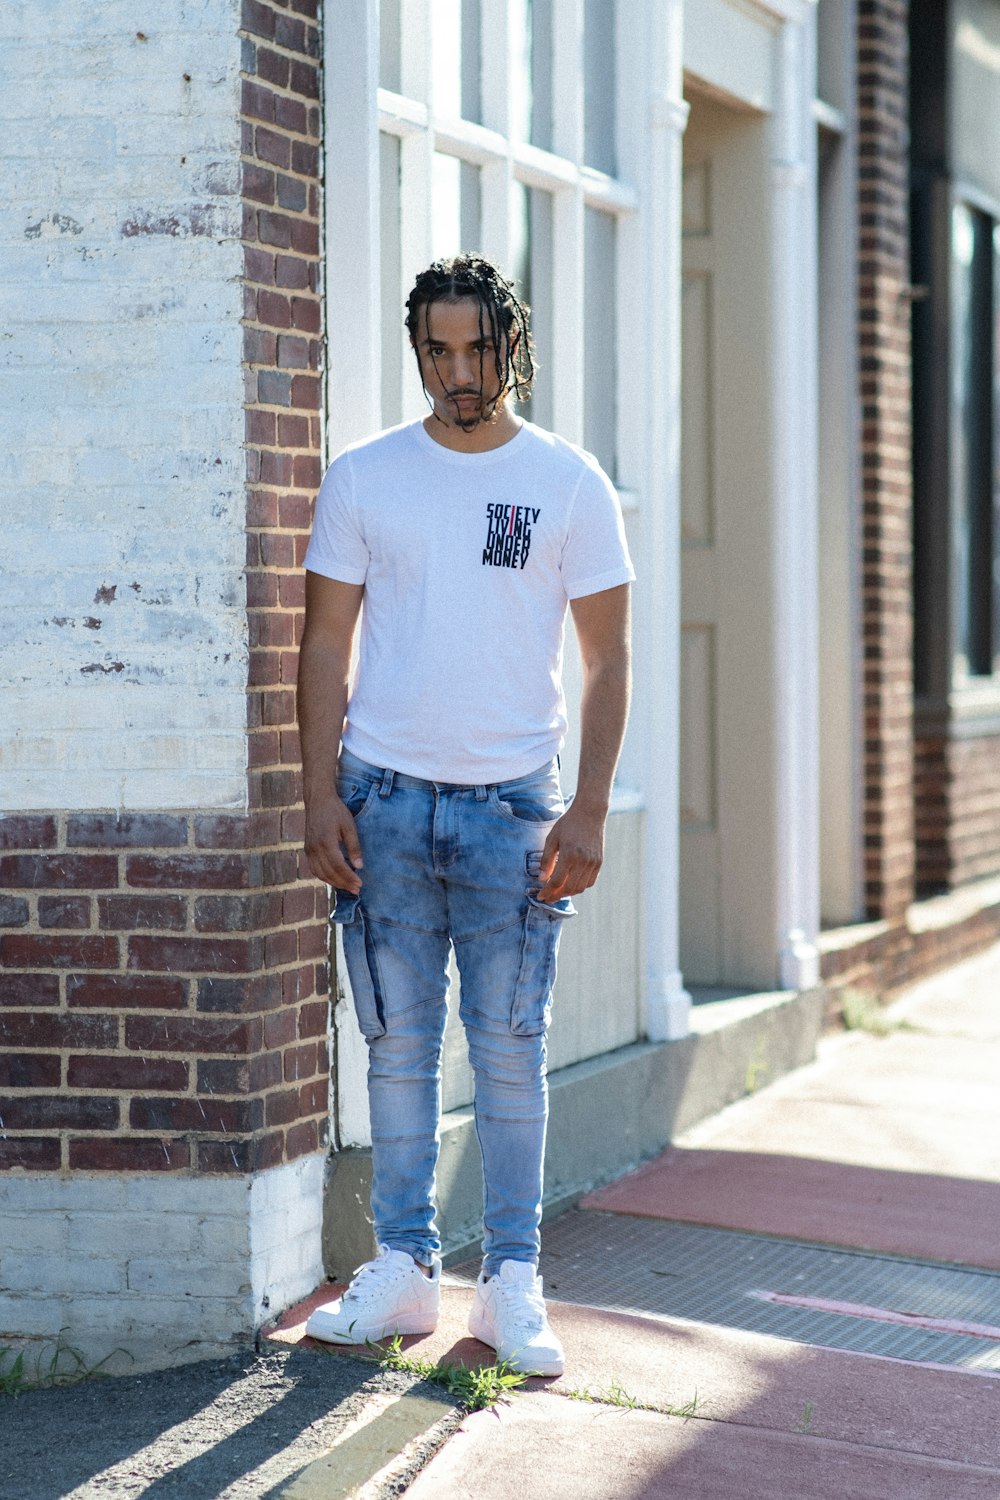 Savant adgang lærred man in white crew neck t-shirt and blue denim jeans standing beside brown  brick wall photo – Free Blue Image on Unsplash